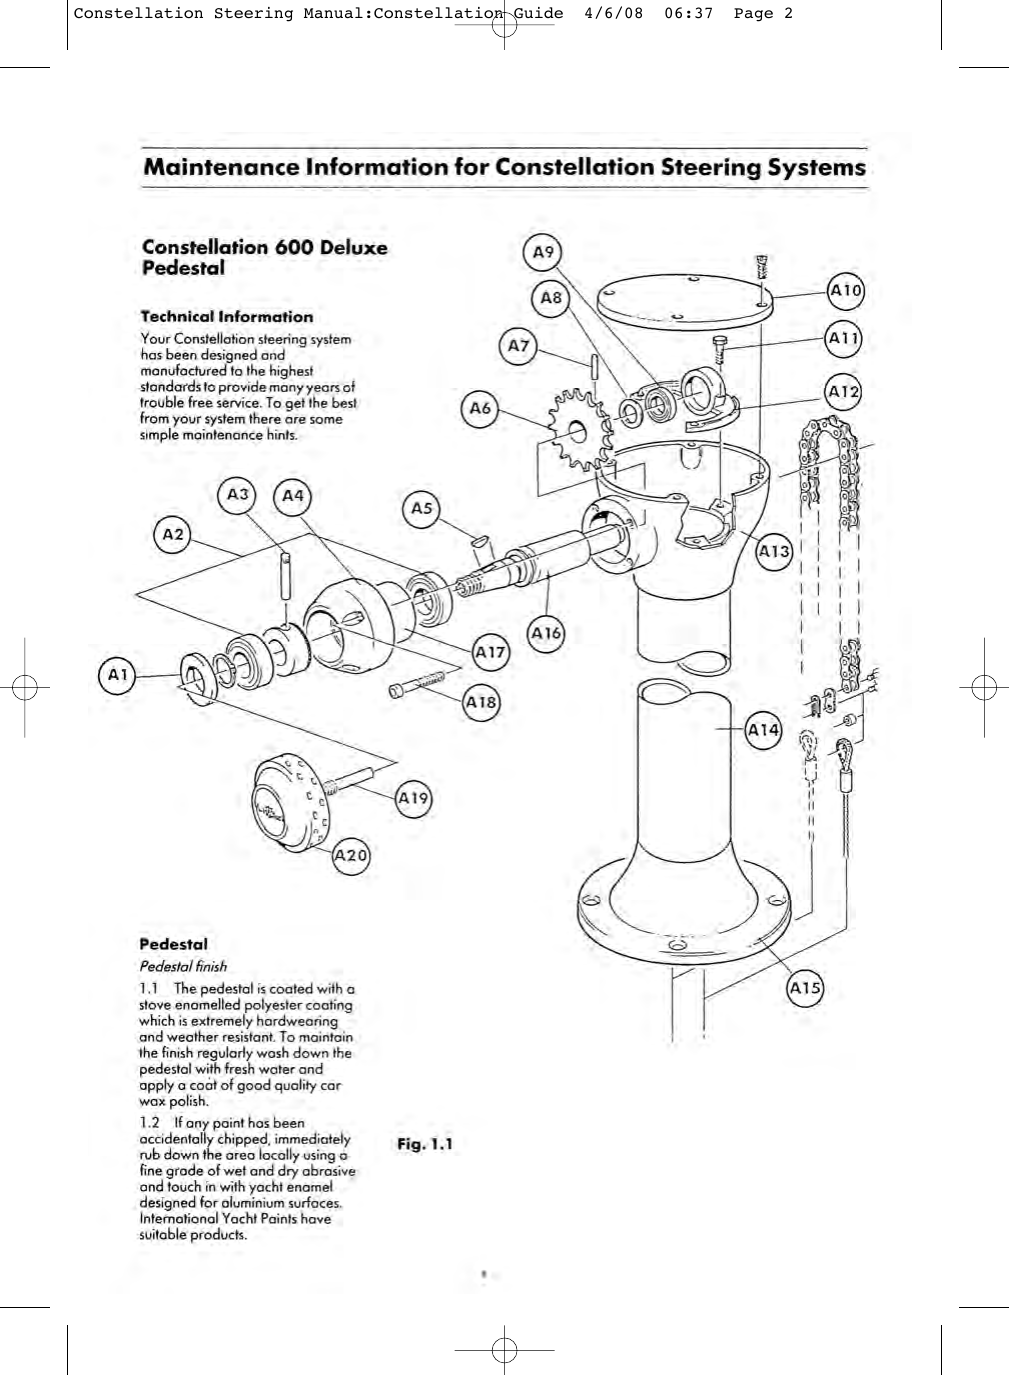 Page 2 of 8 - Constellation Steering Manual:Constellation Guide Constellation-Steering-Manual